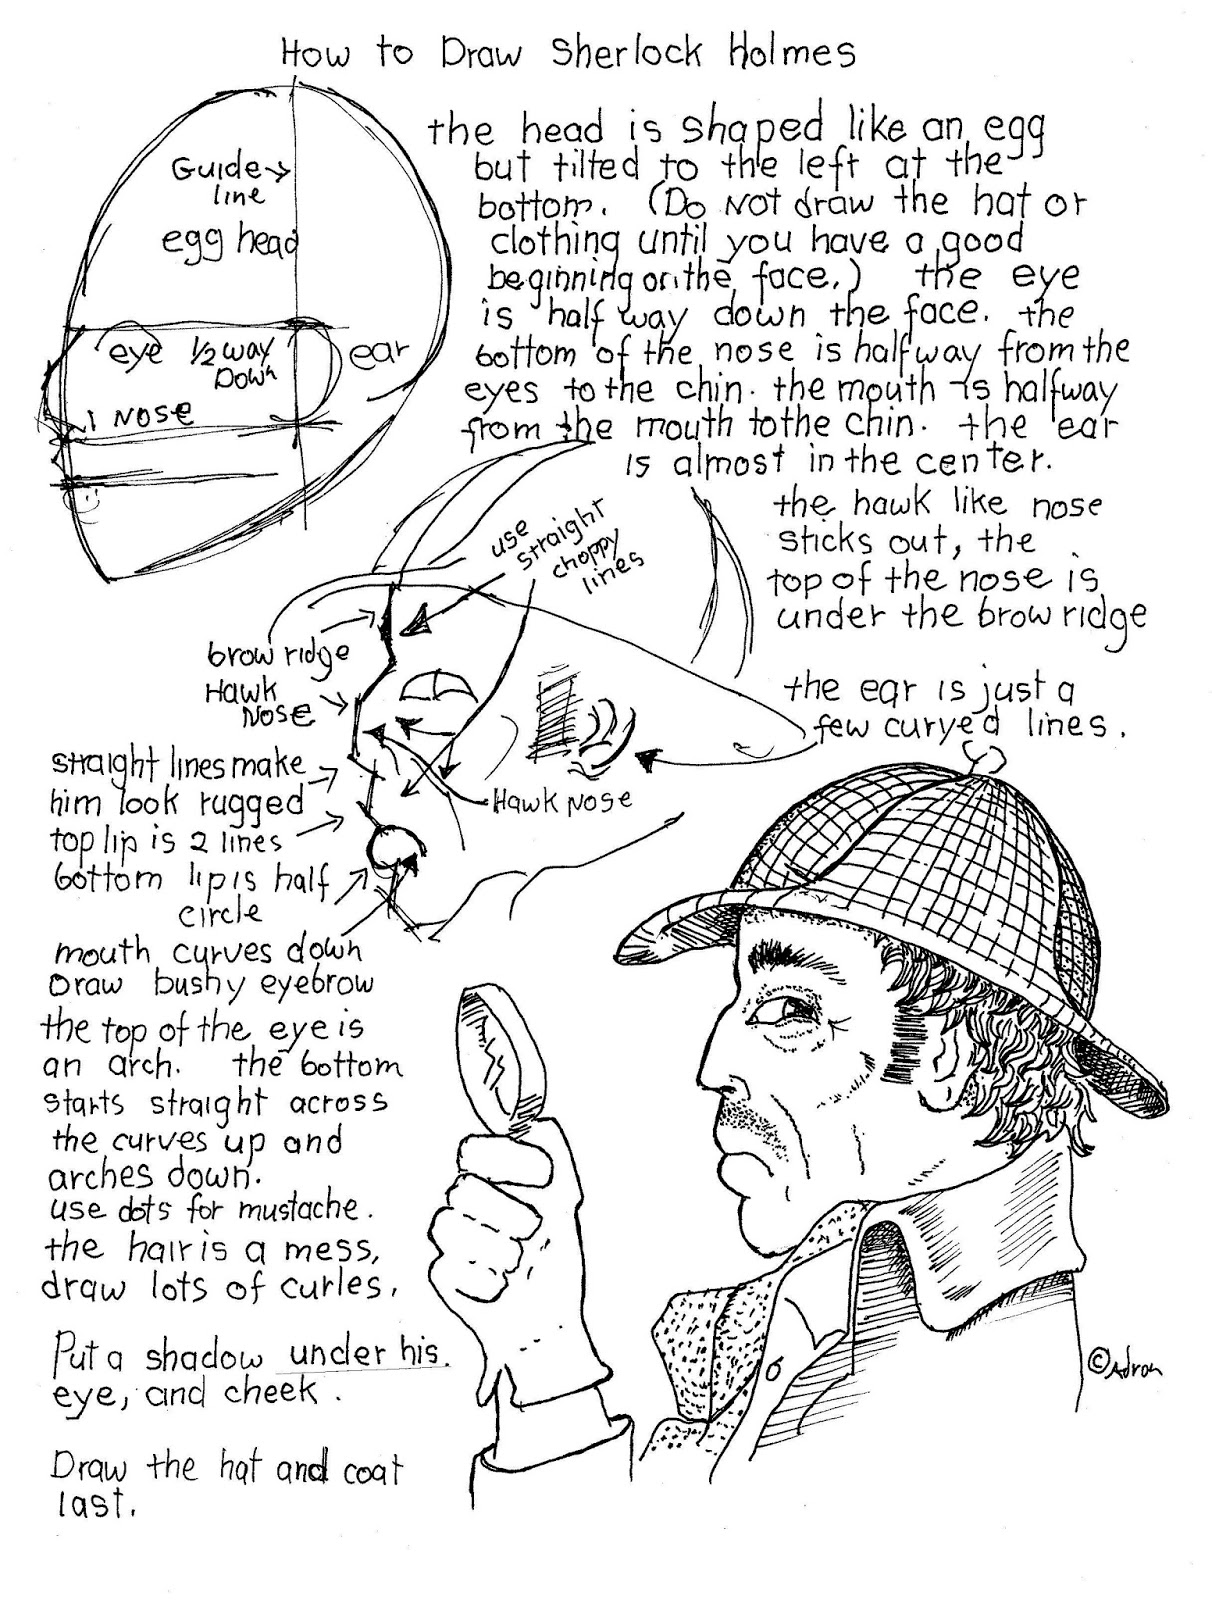 how-to-draw-worksheets-for-the-young-artist-how-to-draw-sherlock-holmes-worksheet-classic-pose